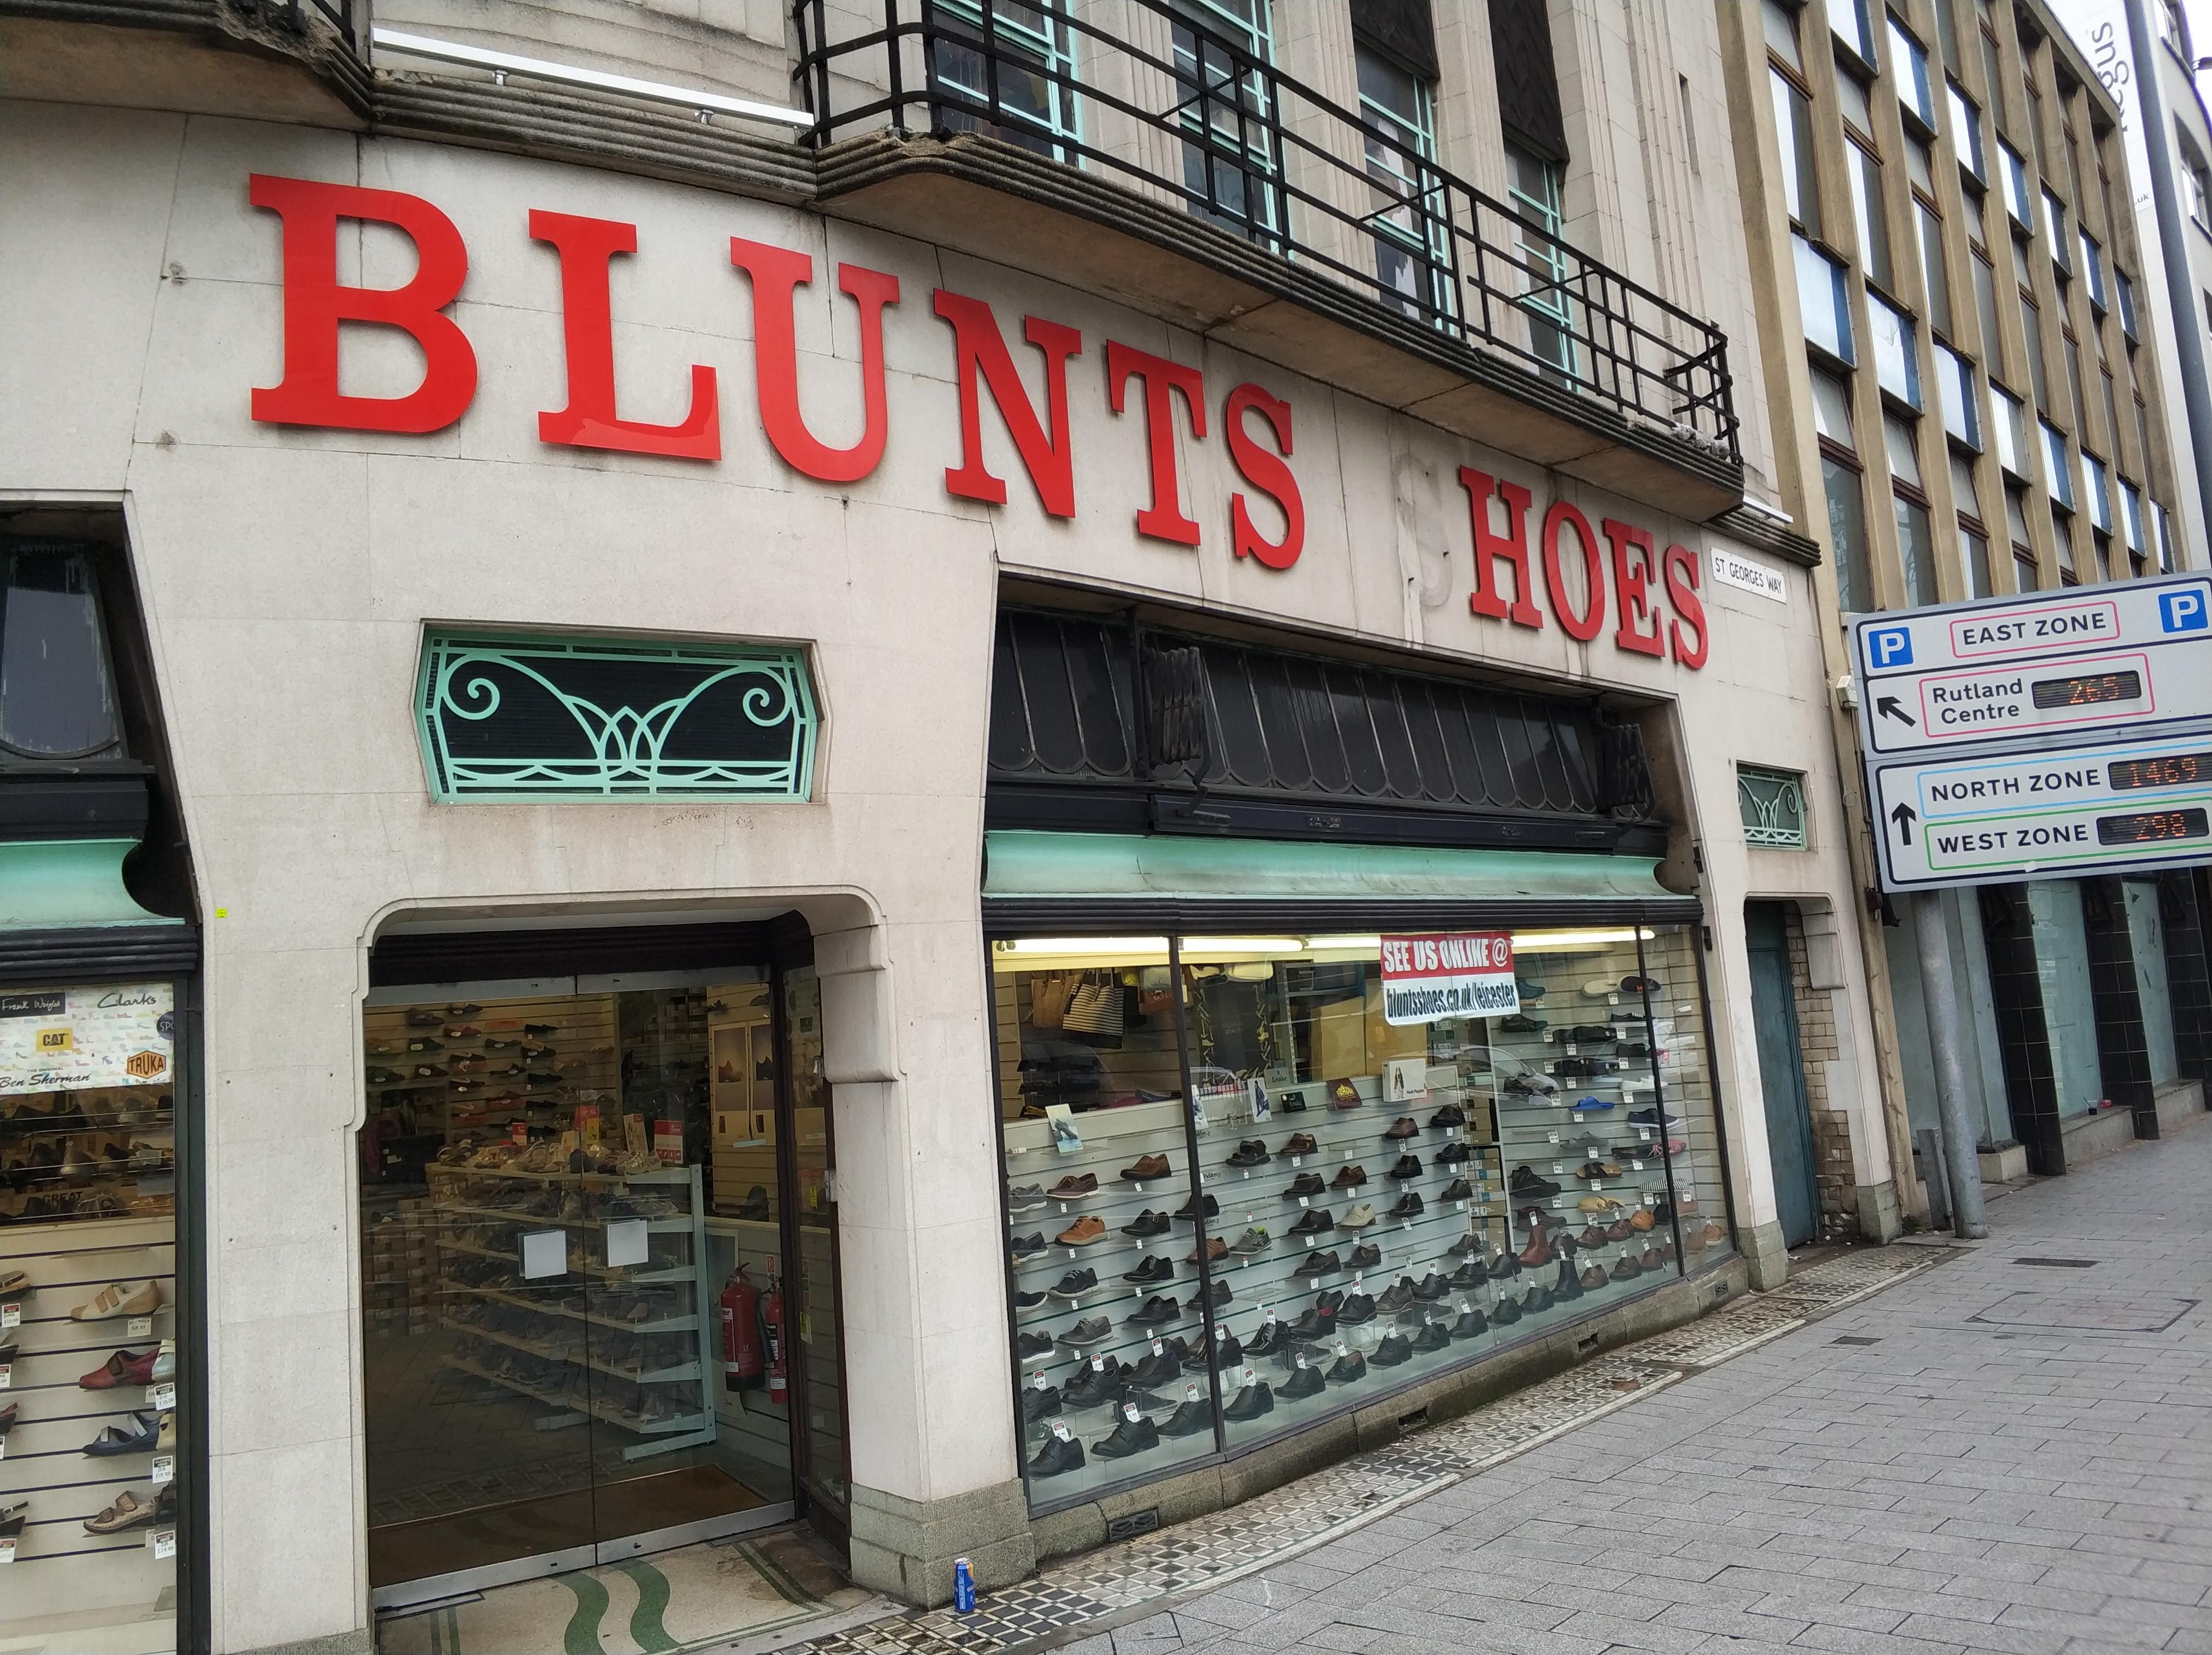 My kind of shop